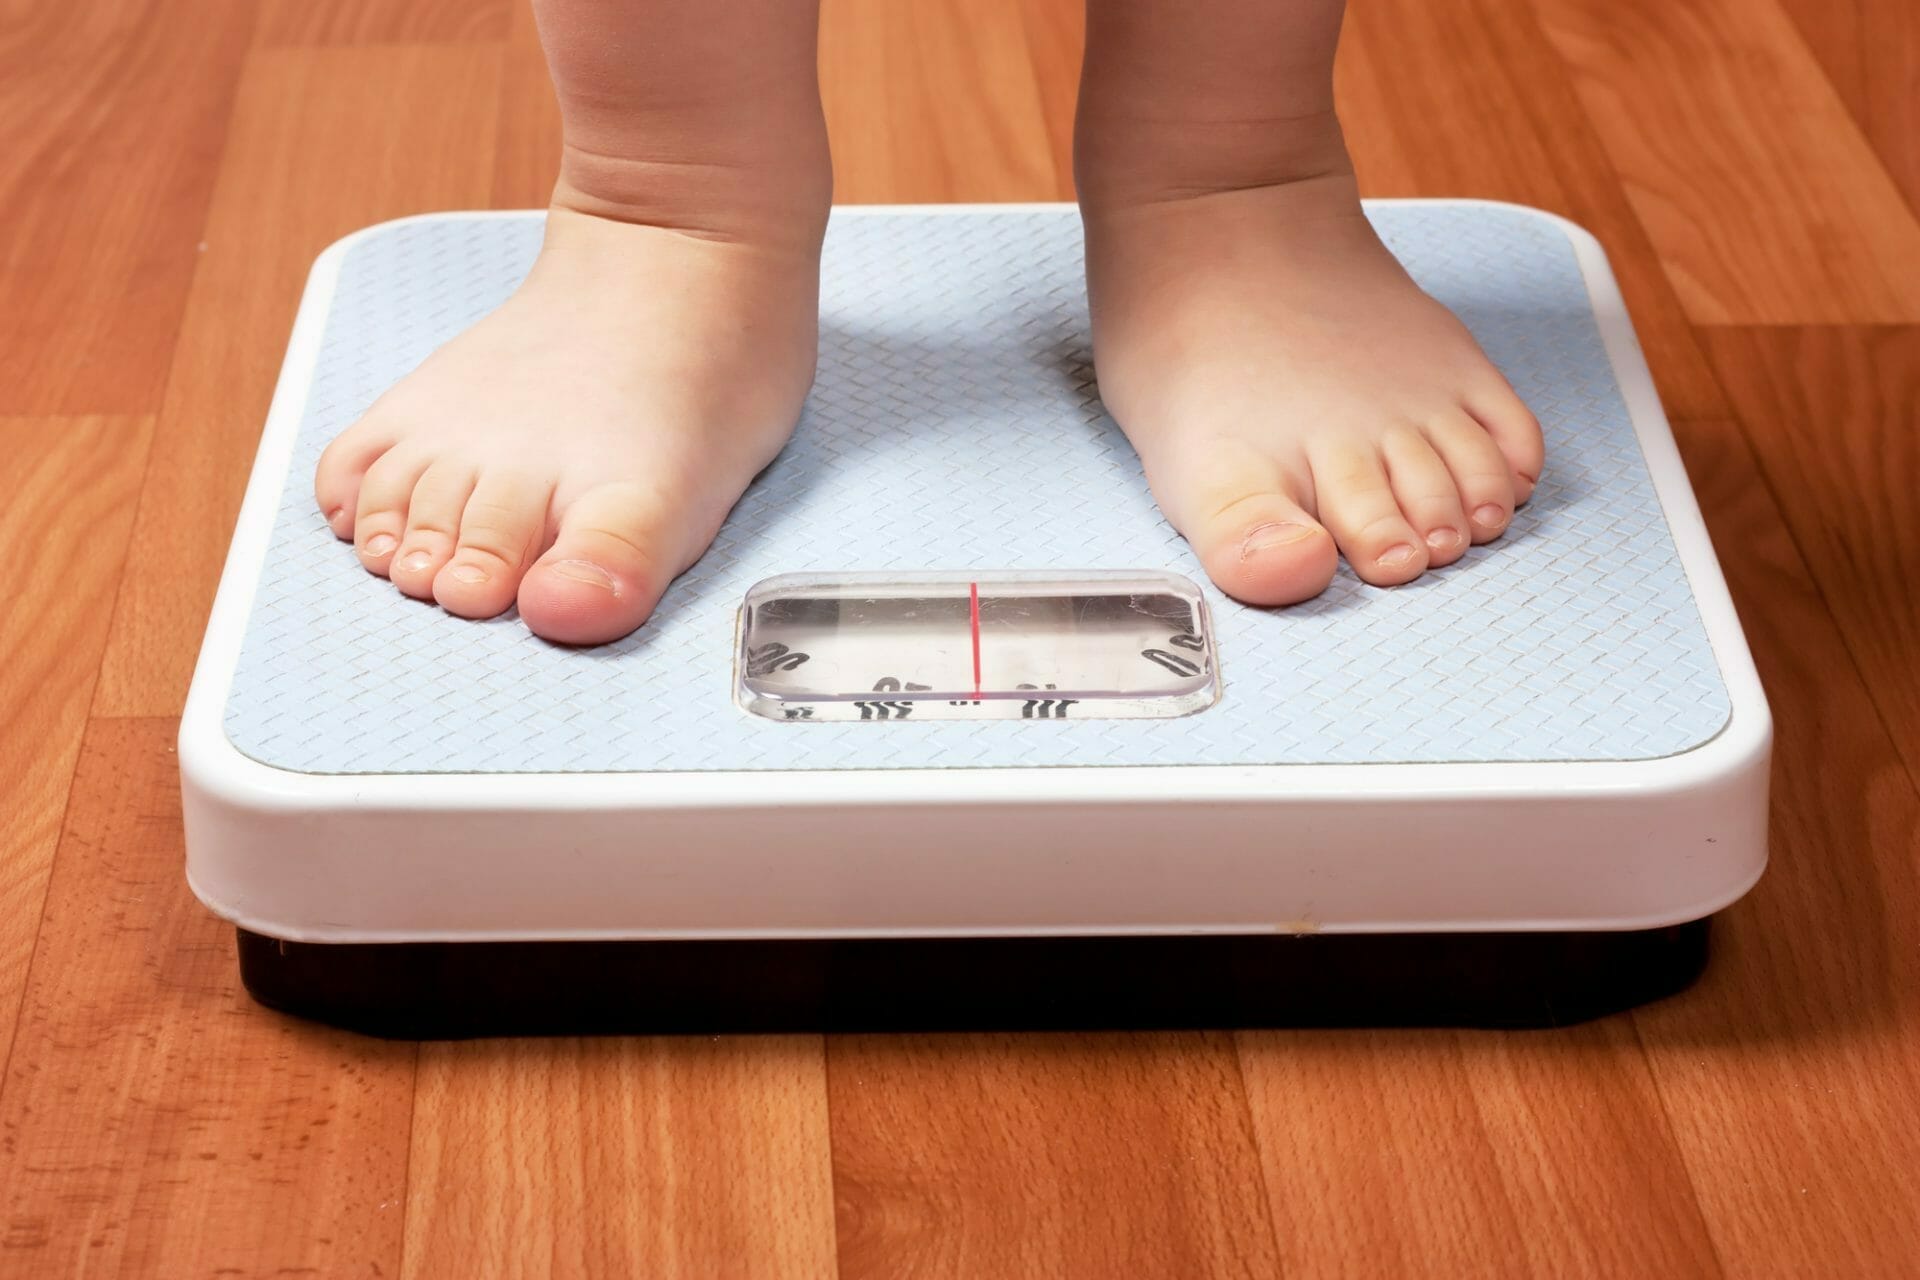 A child's feet on a weight scale.